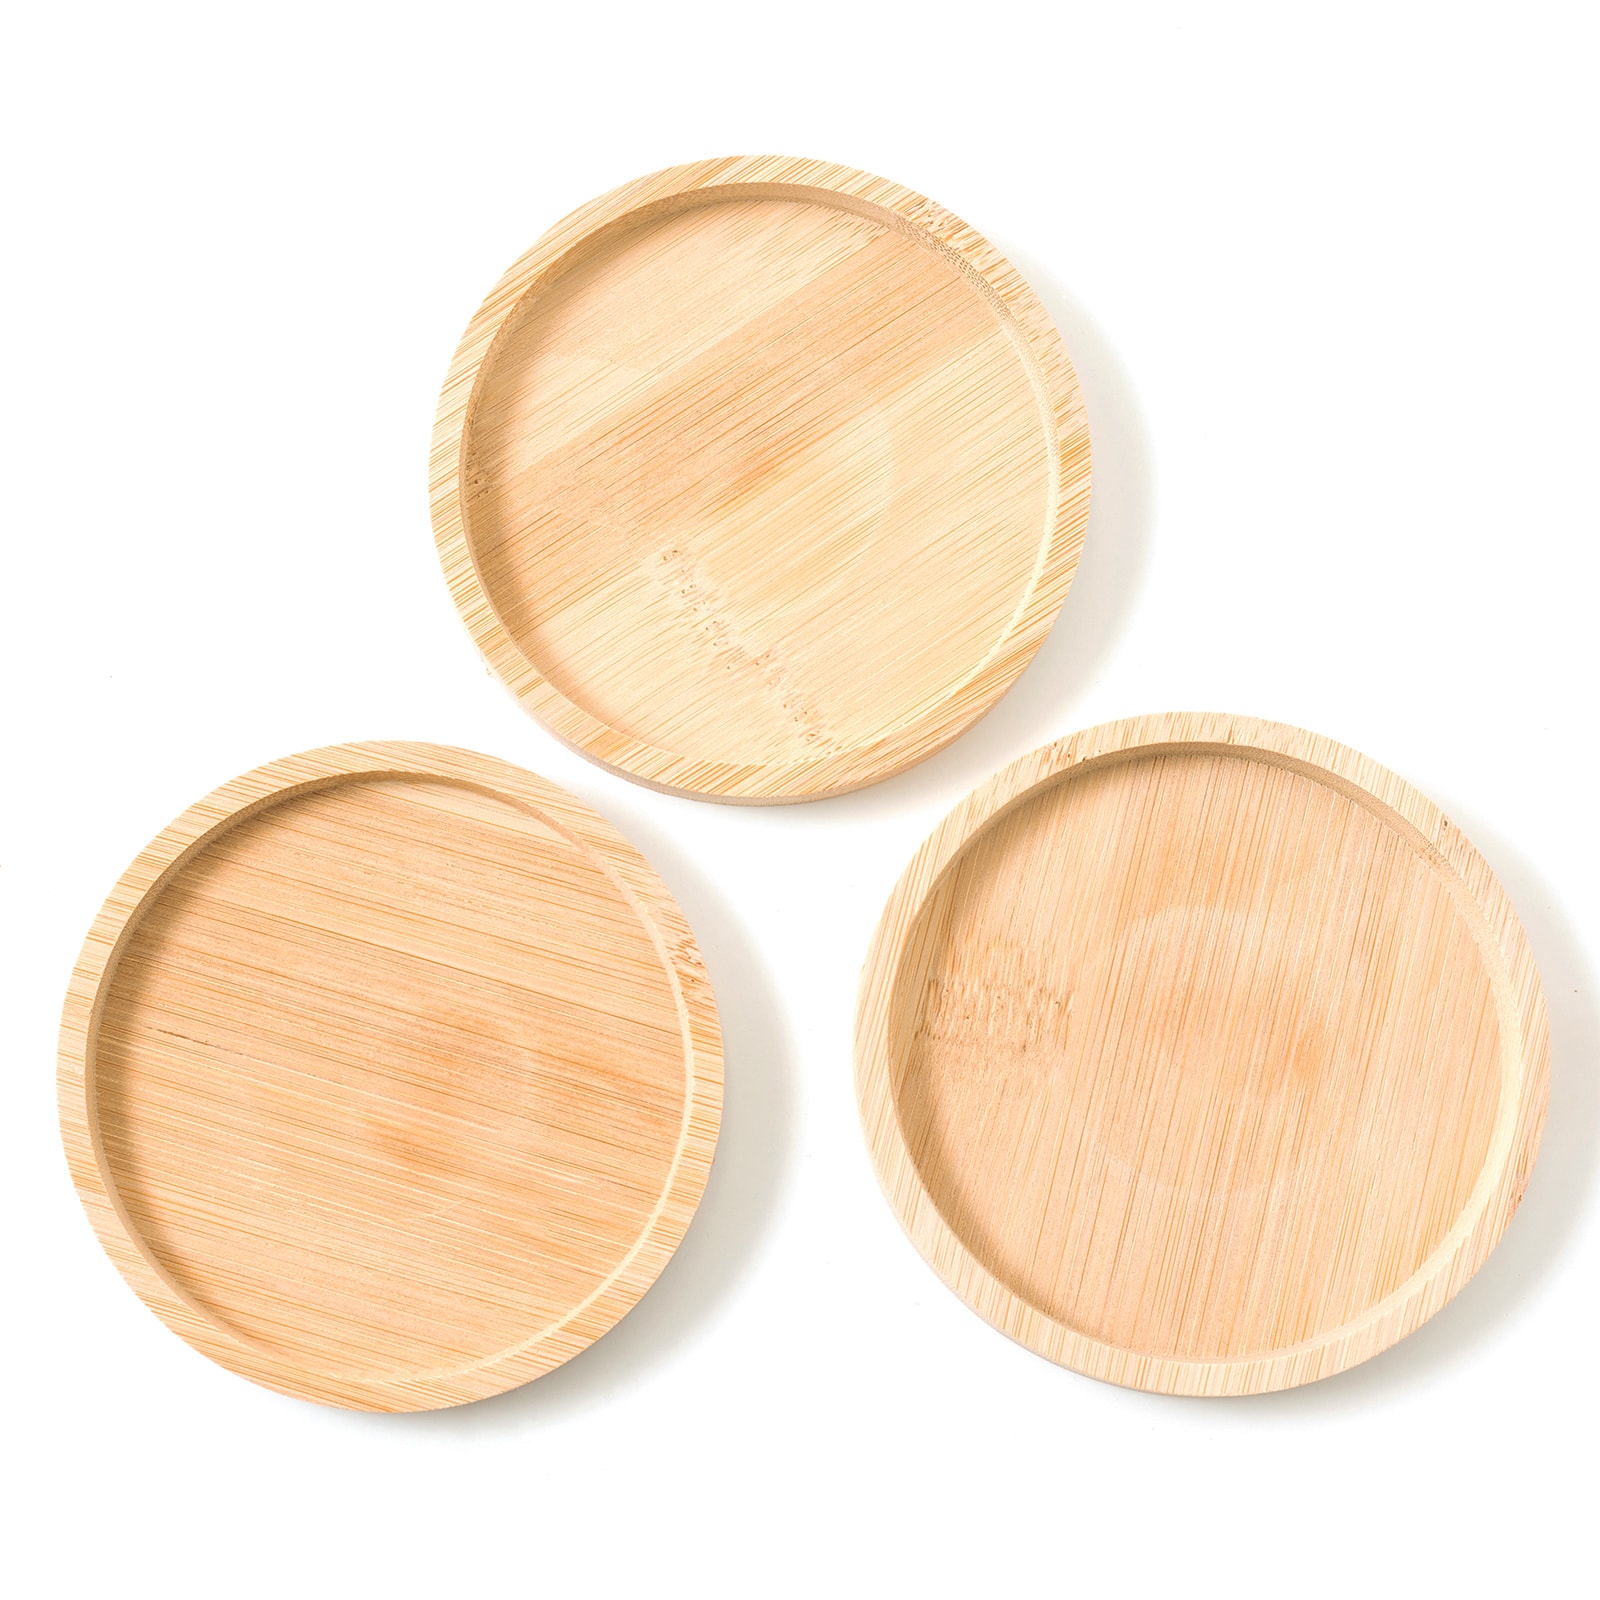 Color Pour Resin Hollow Wood Coasters - American Crafts | Michaels